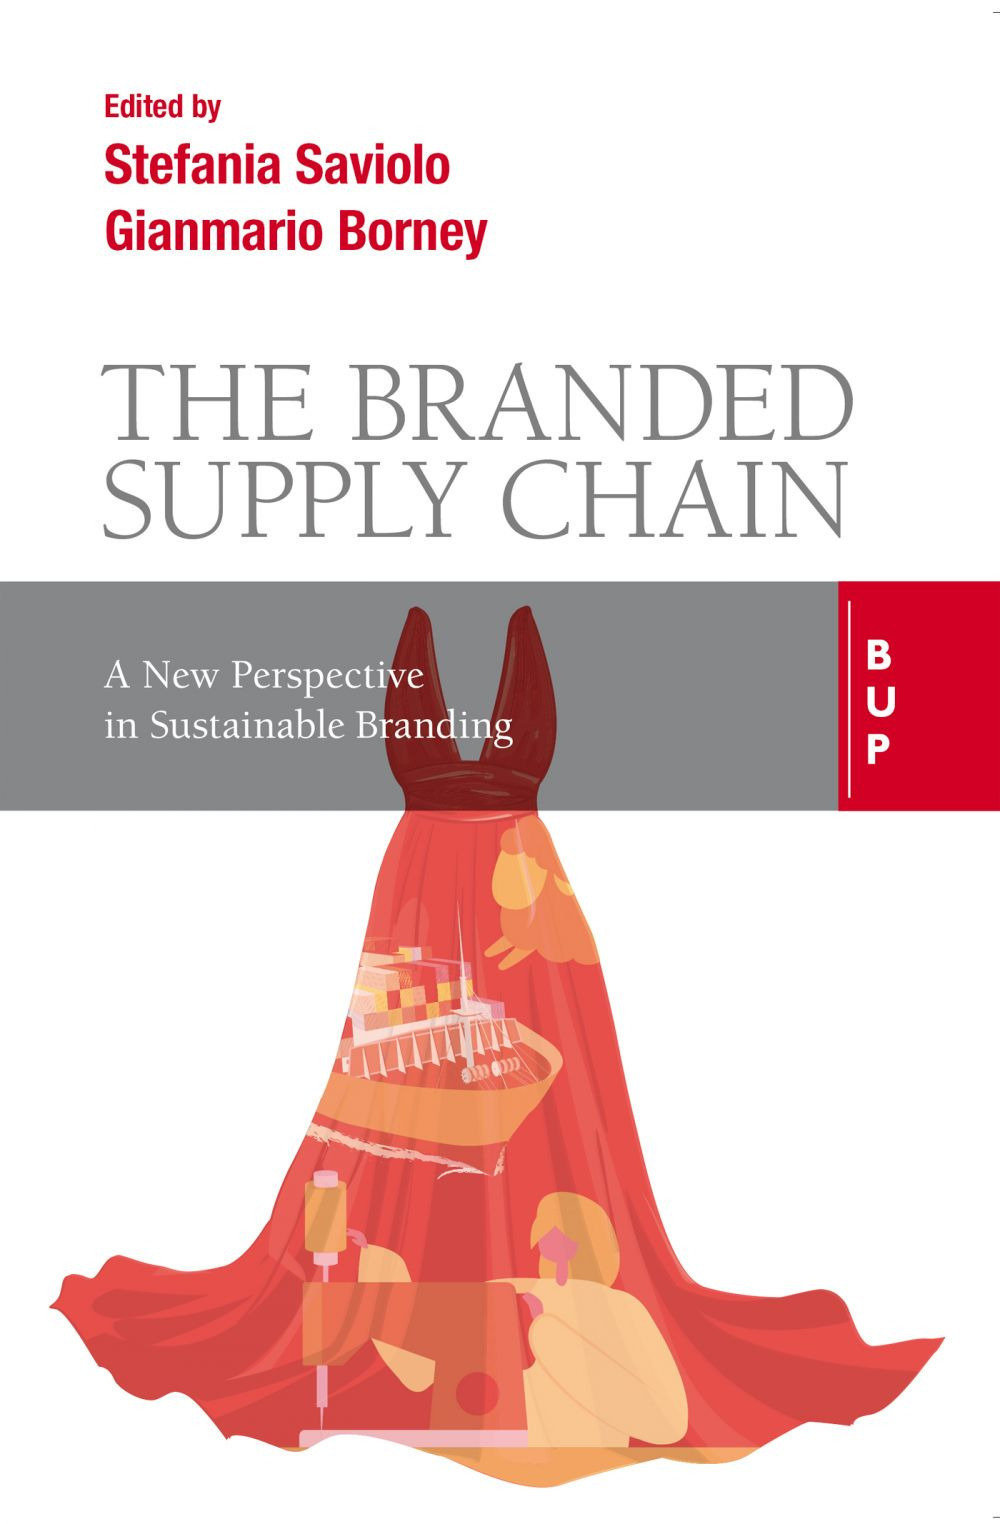 The branded supply chain. A new perspective in sustainable branding